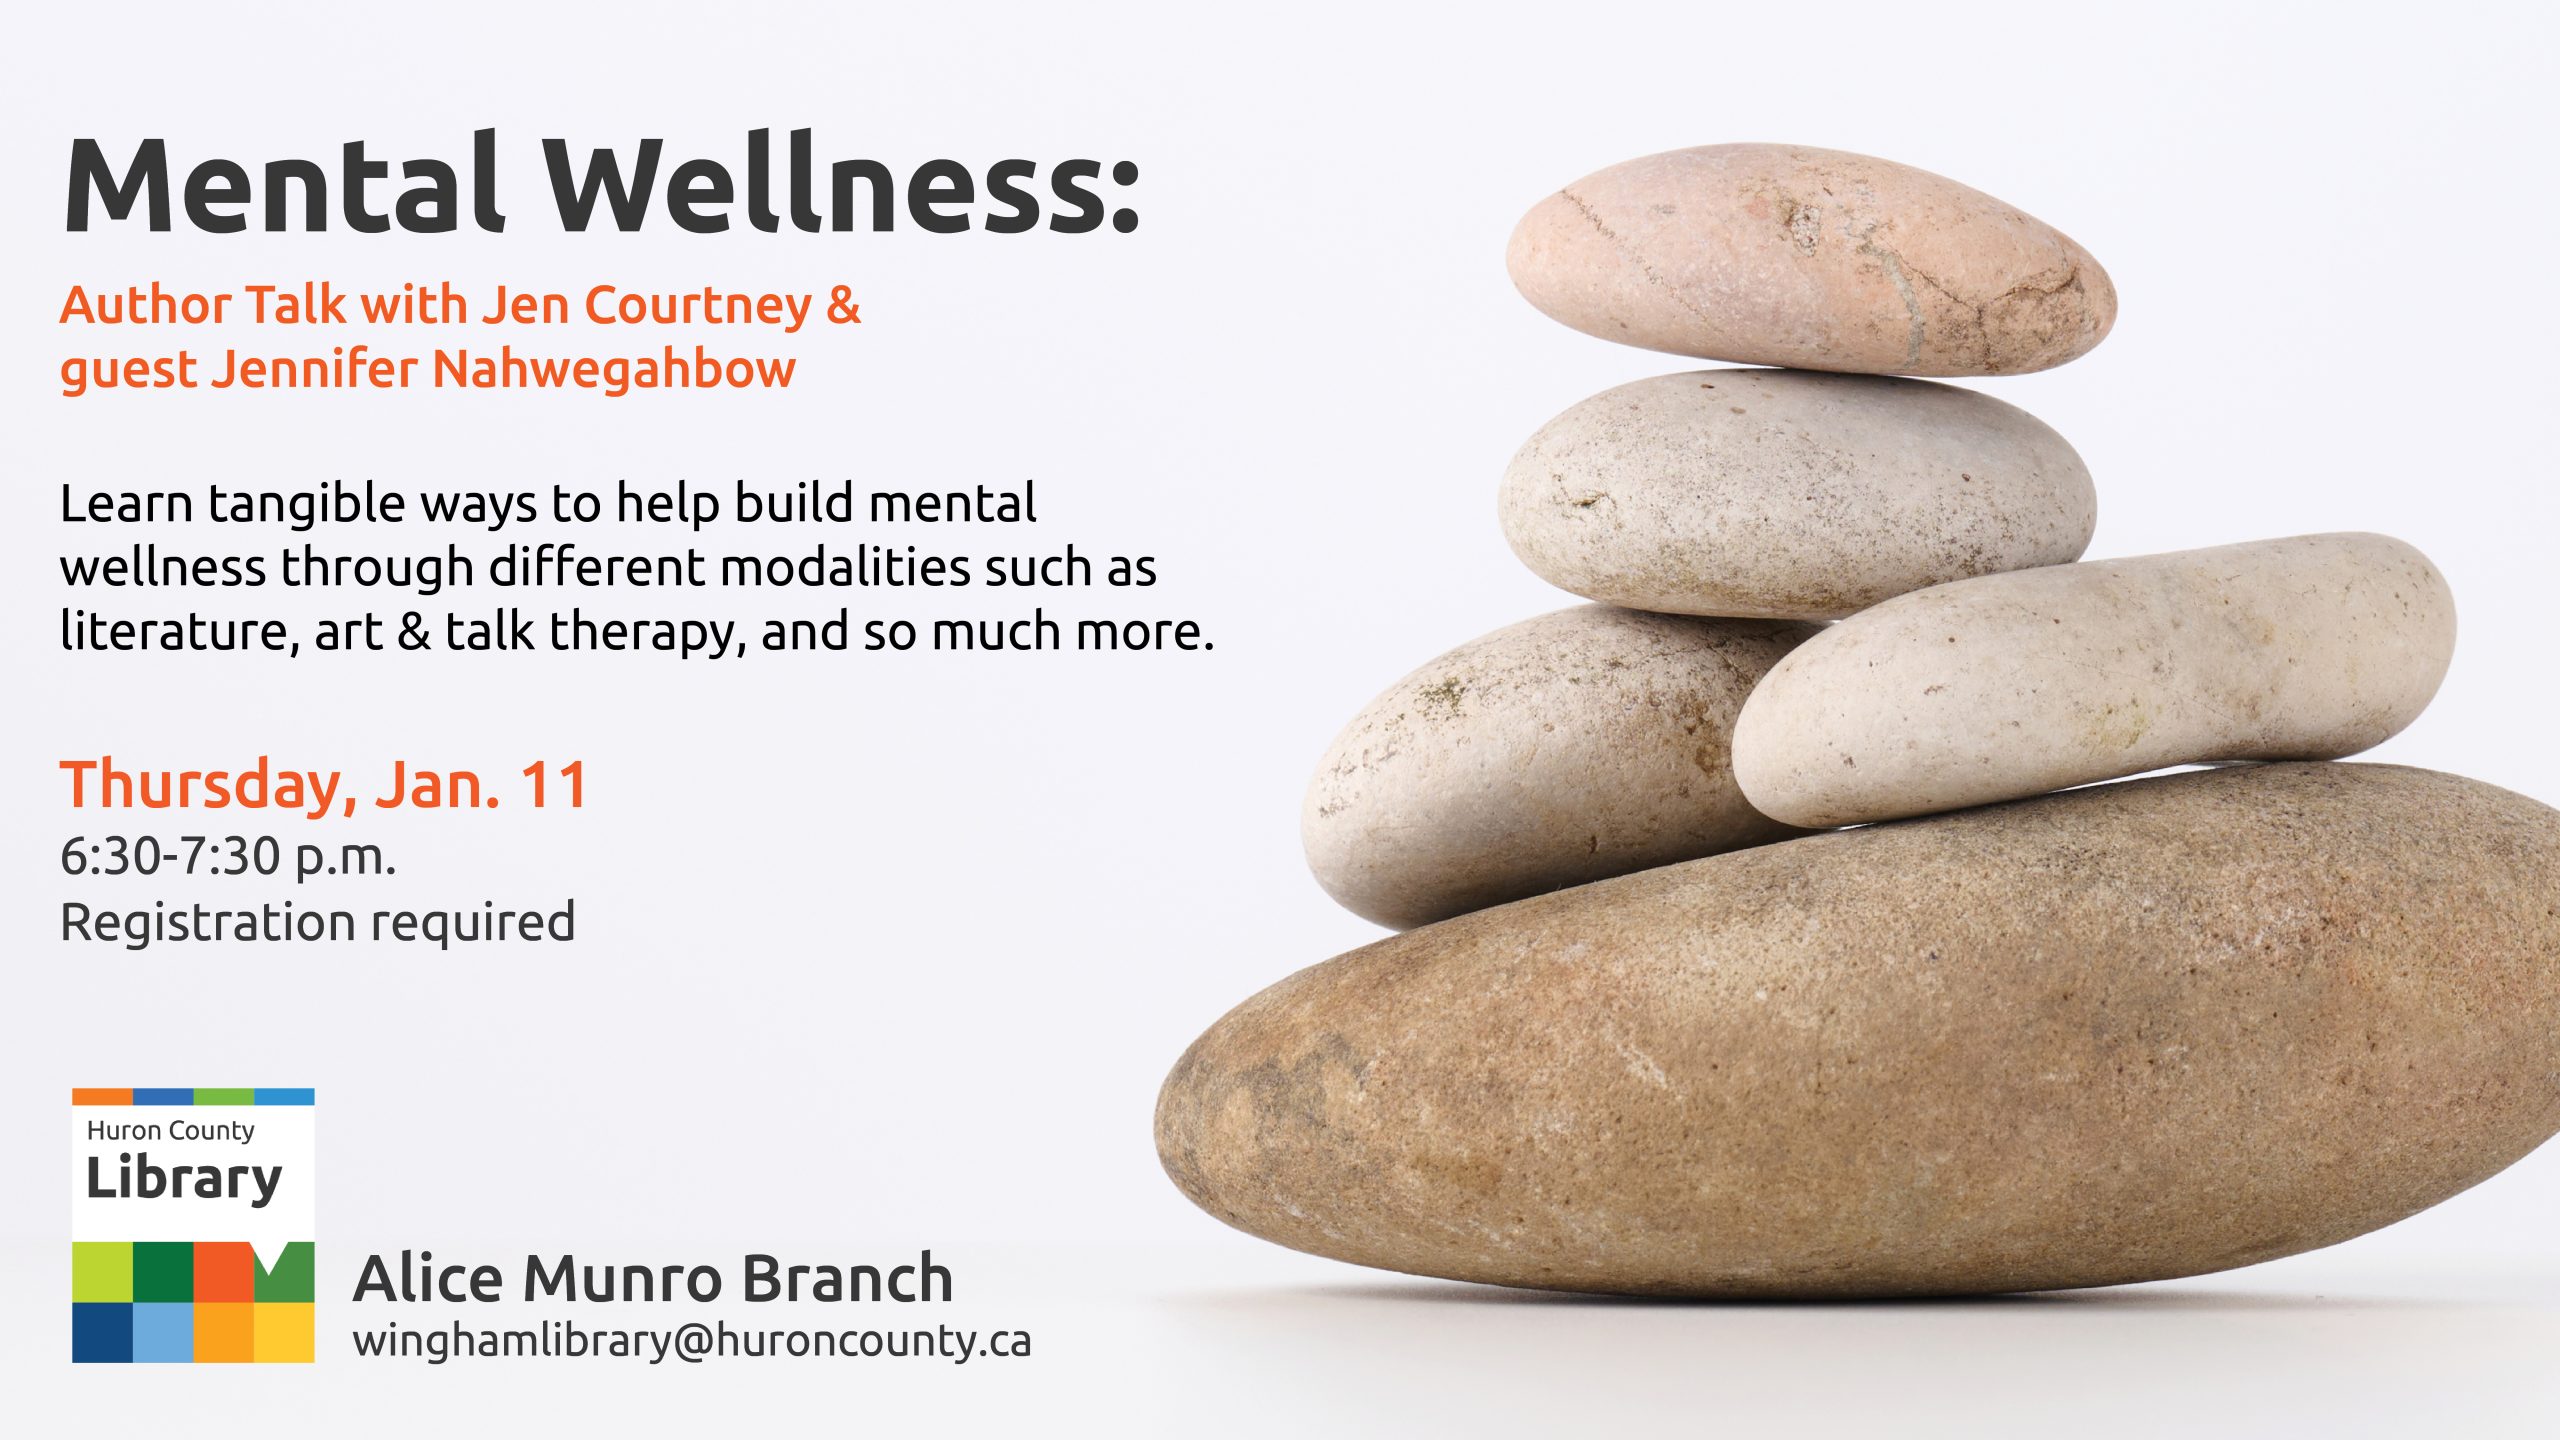 Photo of stones with text promoting mental wellness author talk with Jen Courtney at Alice Munro Branch